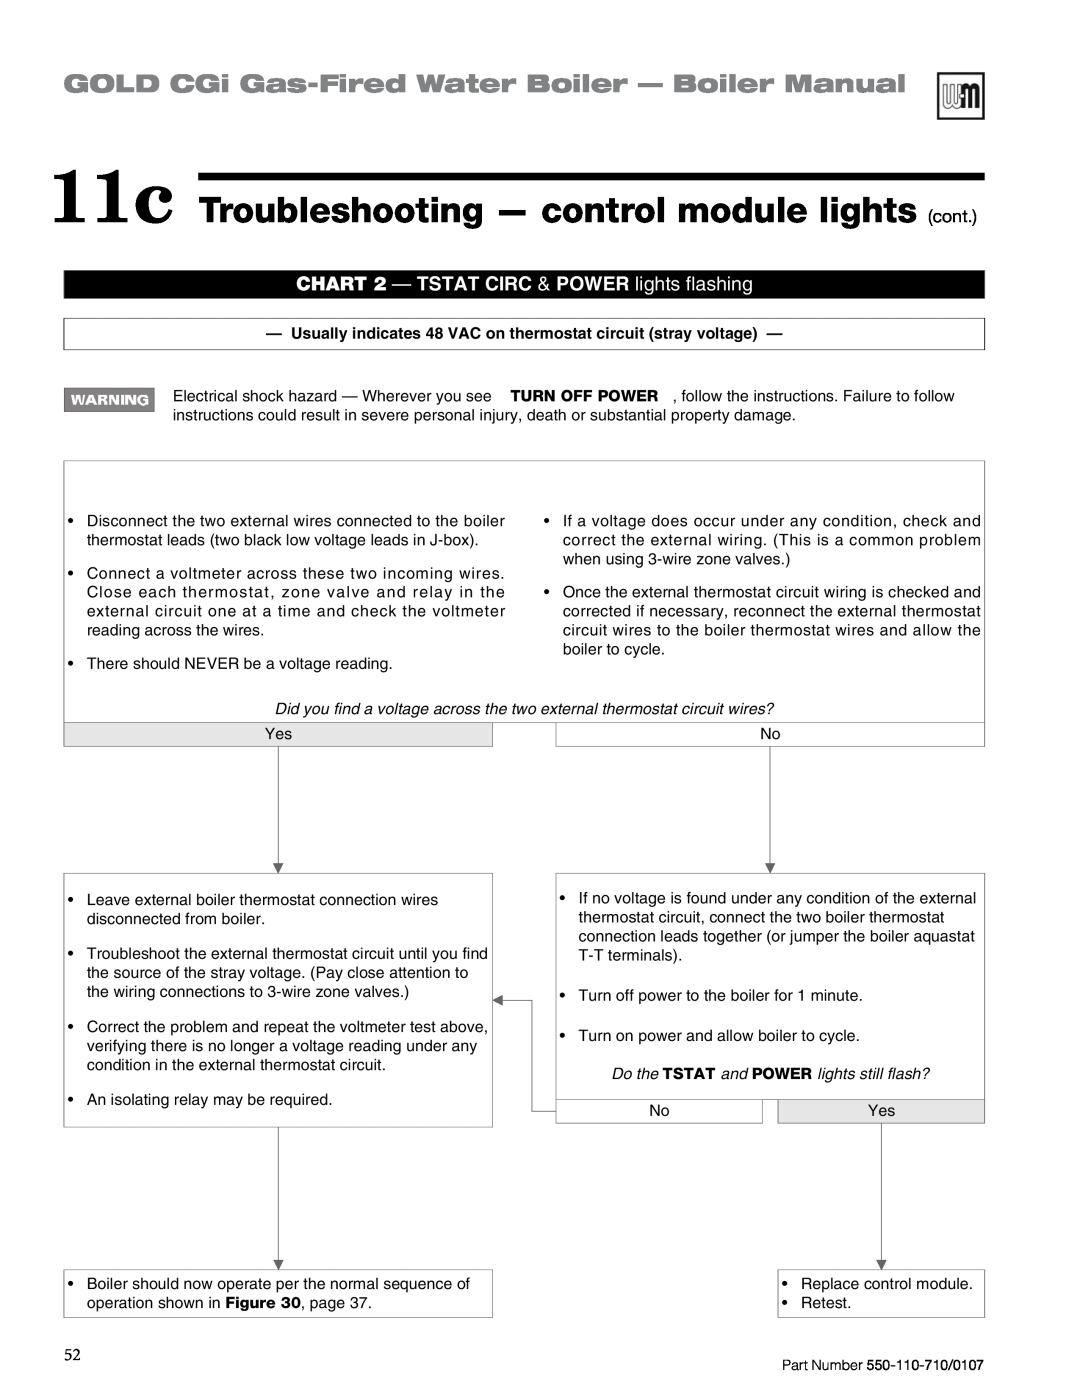 Weil-McLain 550-110-710/0107 11c Troubleshooting — control module lights cont, Do the TSTAT and POWER lights still flash? 